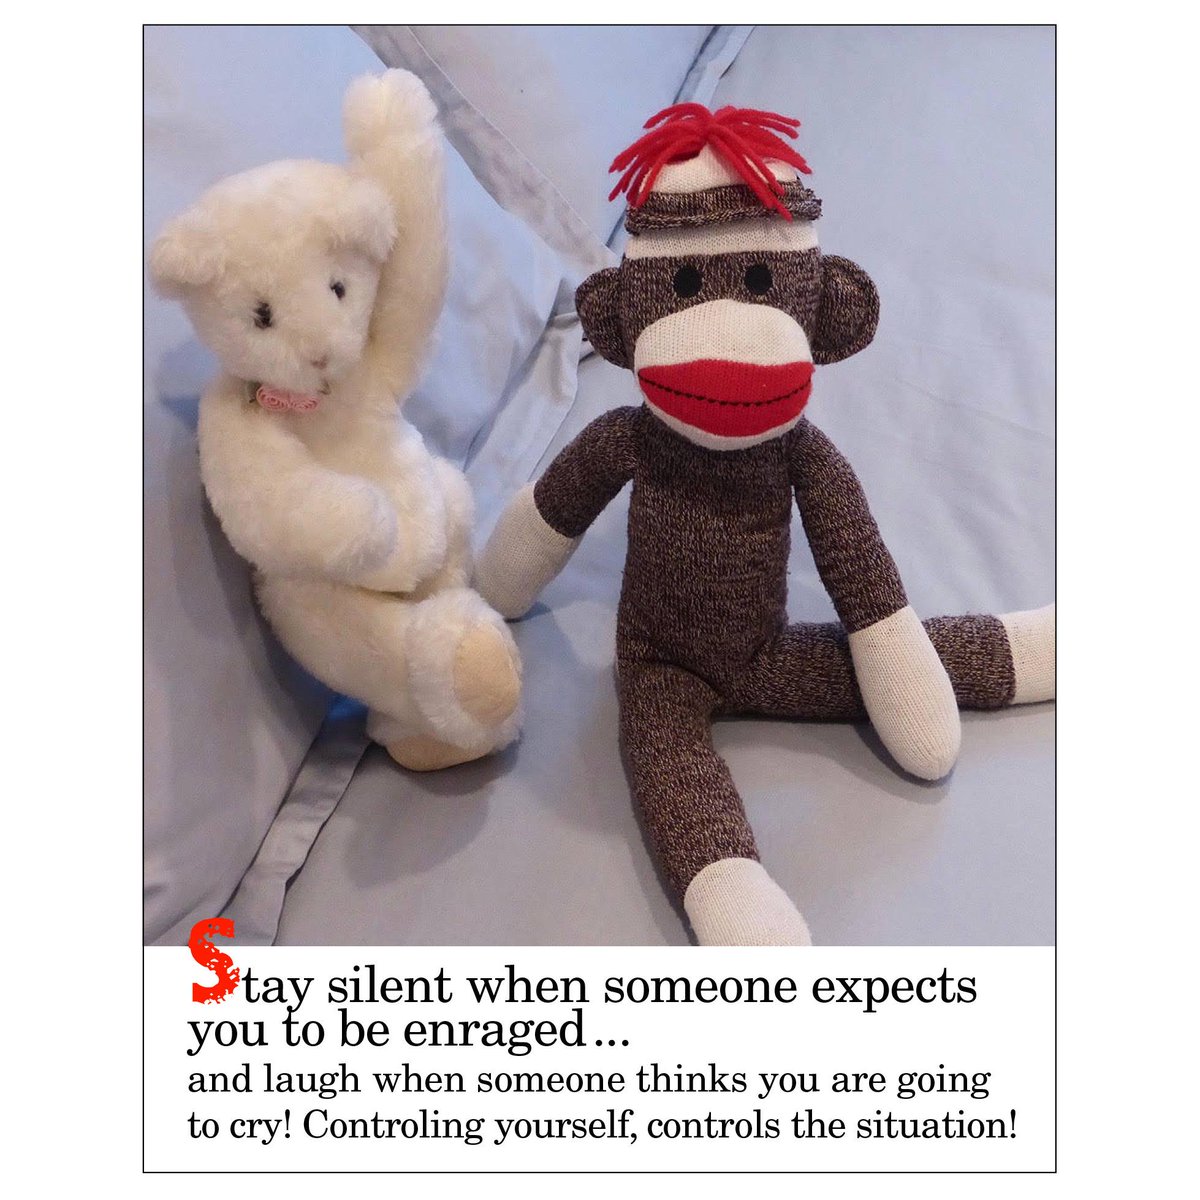 Thought for today. #sockmonkeysez #motivation #inspiration #wordsofwisdom #wordstoliveby  #control #controlyourself #controlthesituation #dontletthesituationcontrolyou #laughdontcry #besilentwhenangry #youareincontrol